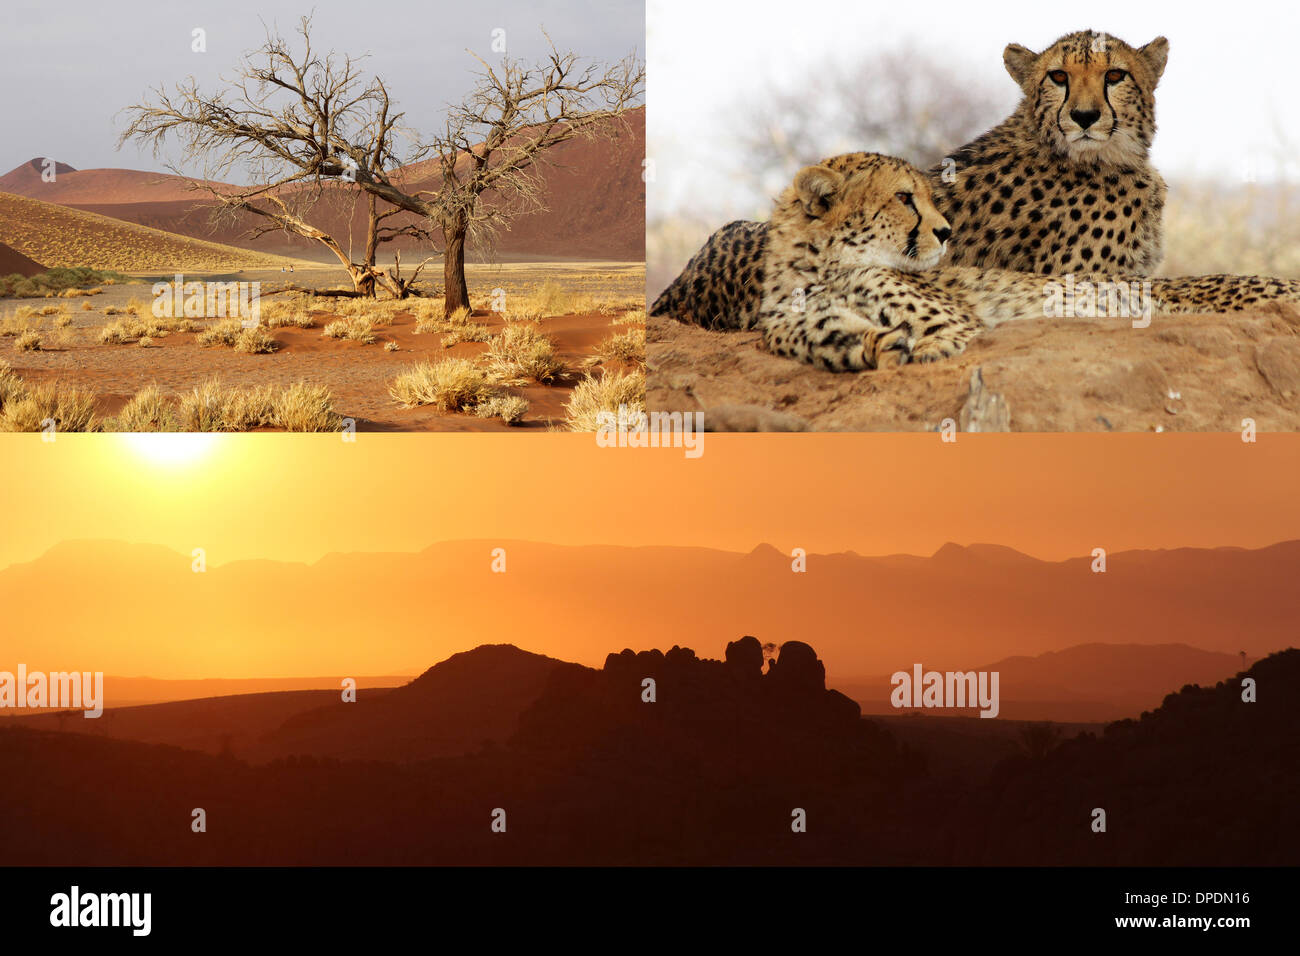 Composite of three images  of Namibia ,showing cheetahs, sand dunes and a wonderful orange sunset with rocks in the foreground. Stock Photo